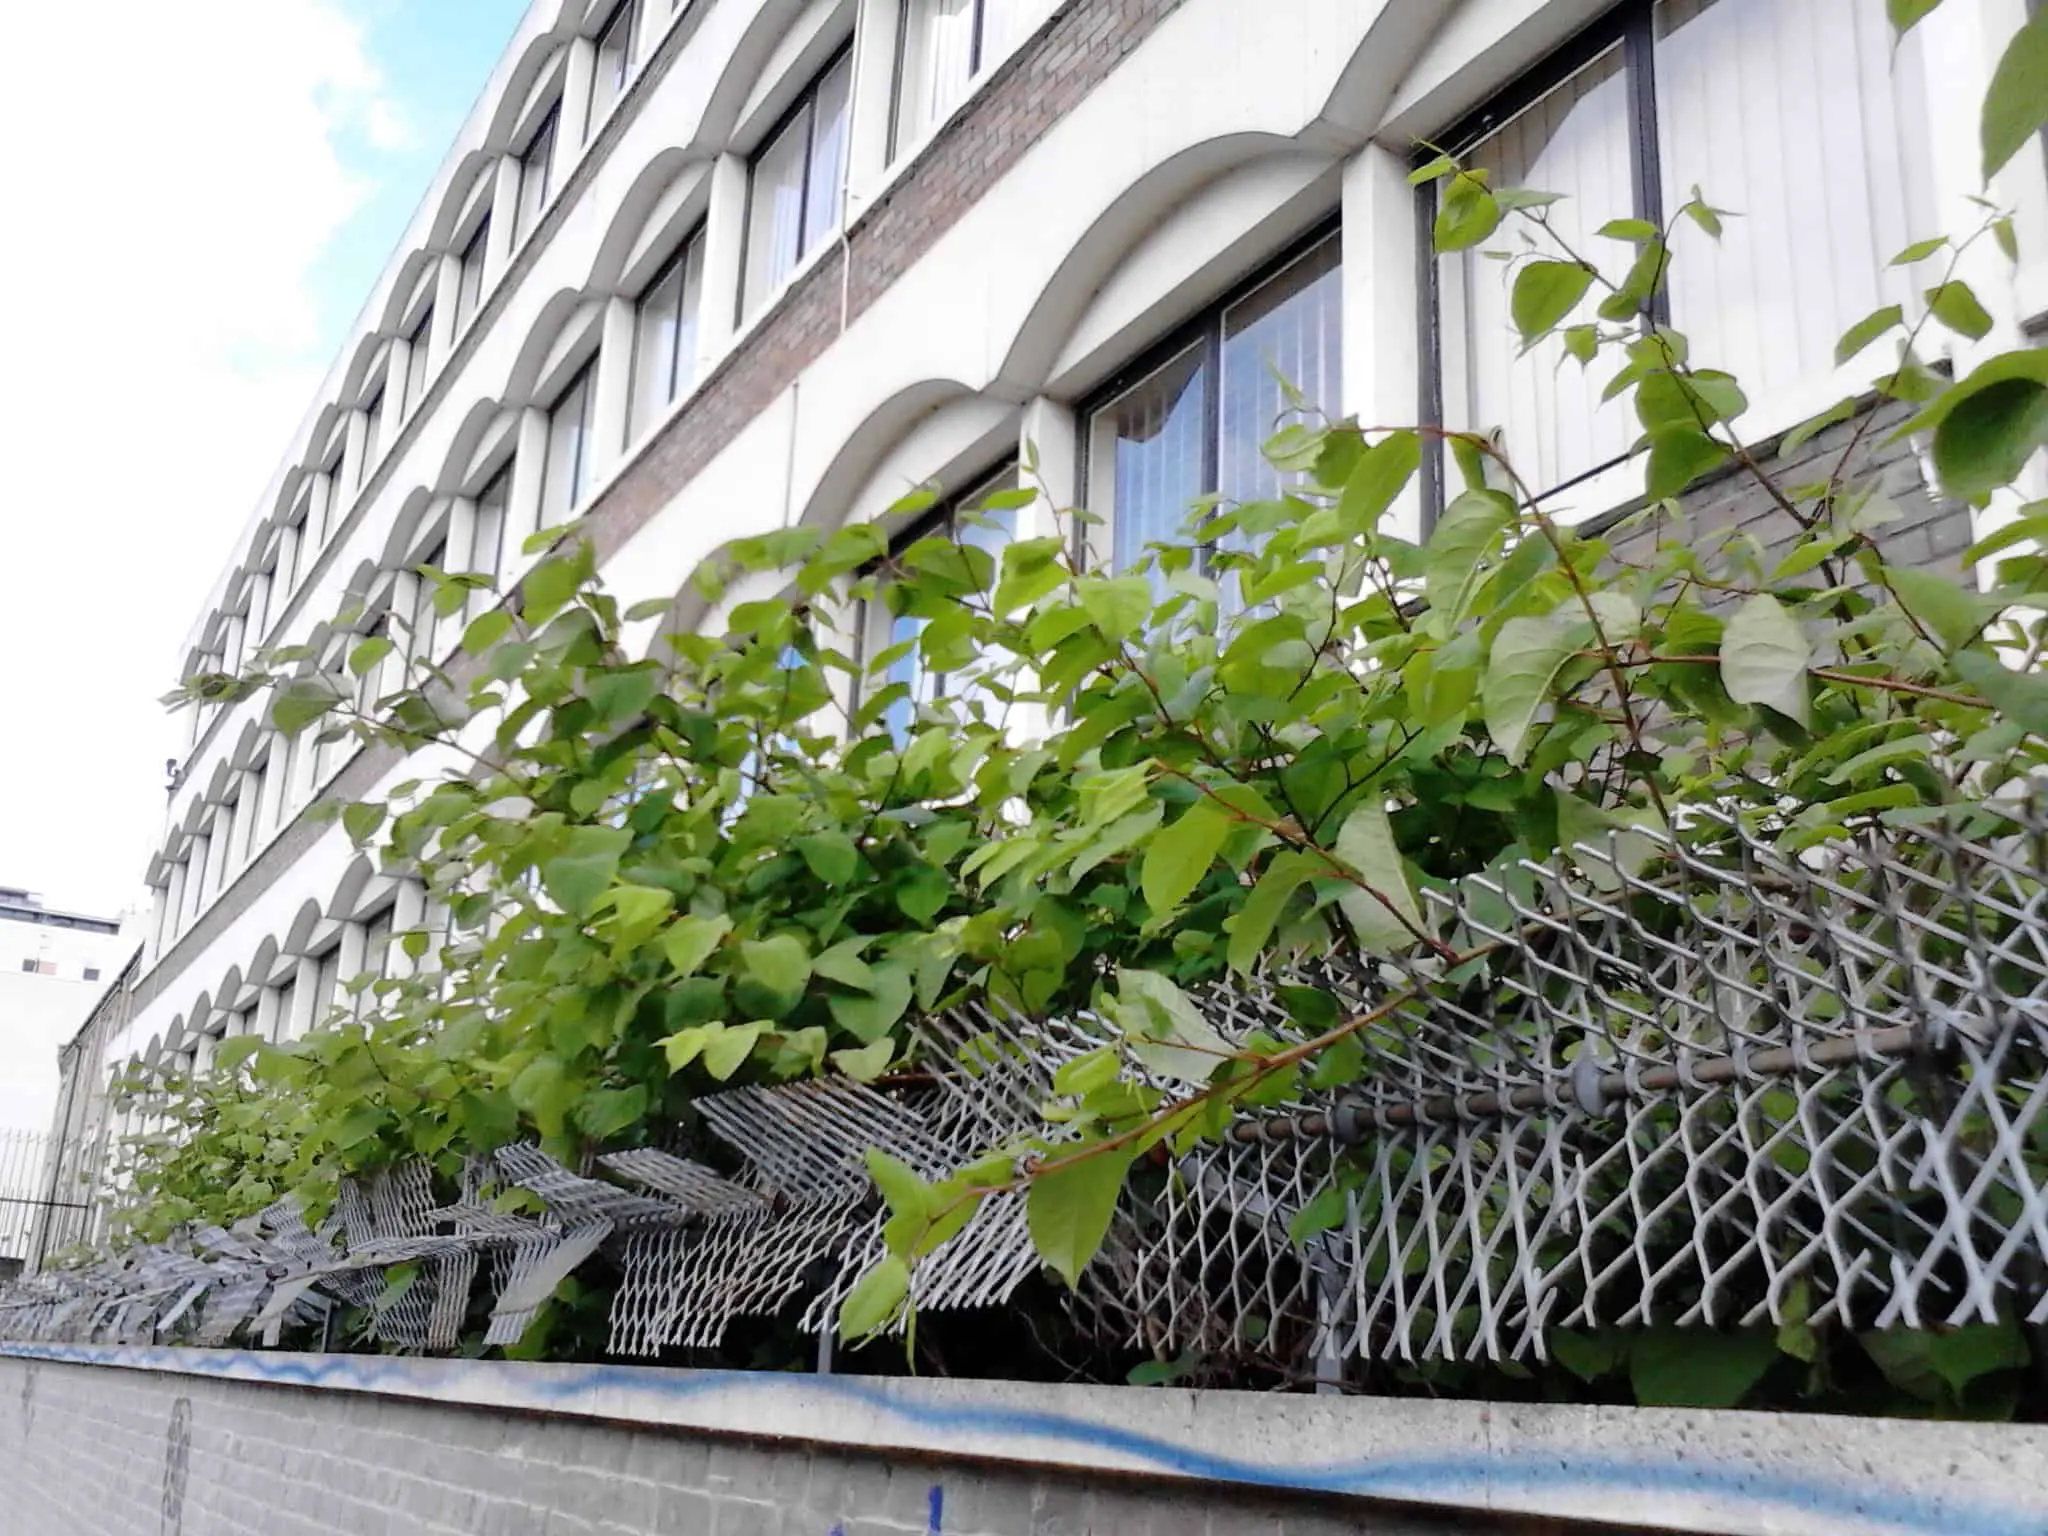 Left unchecked any building looks run down and neglected when Japanese knotweed takes over